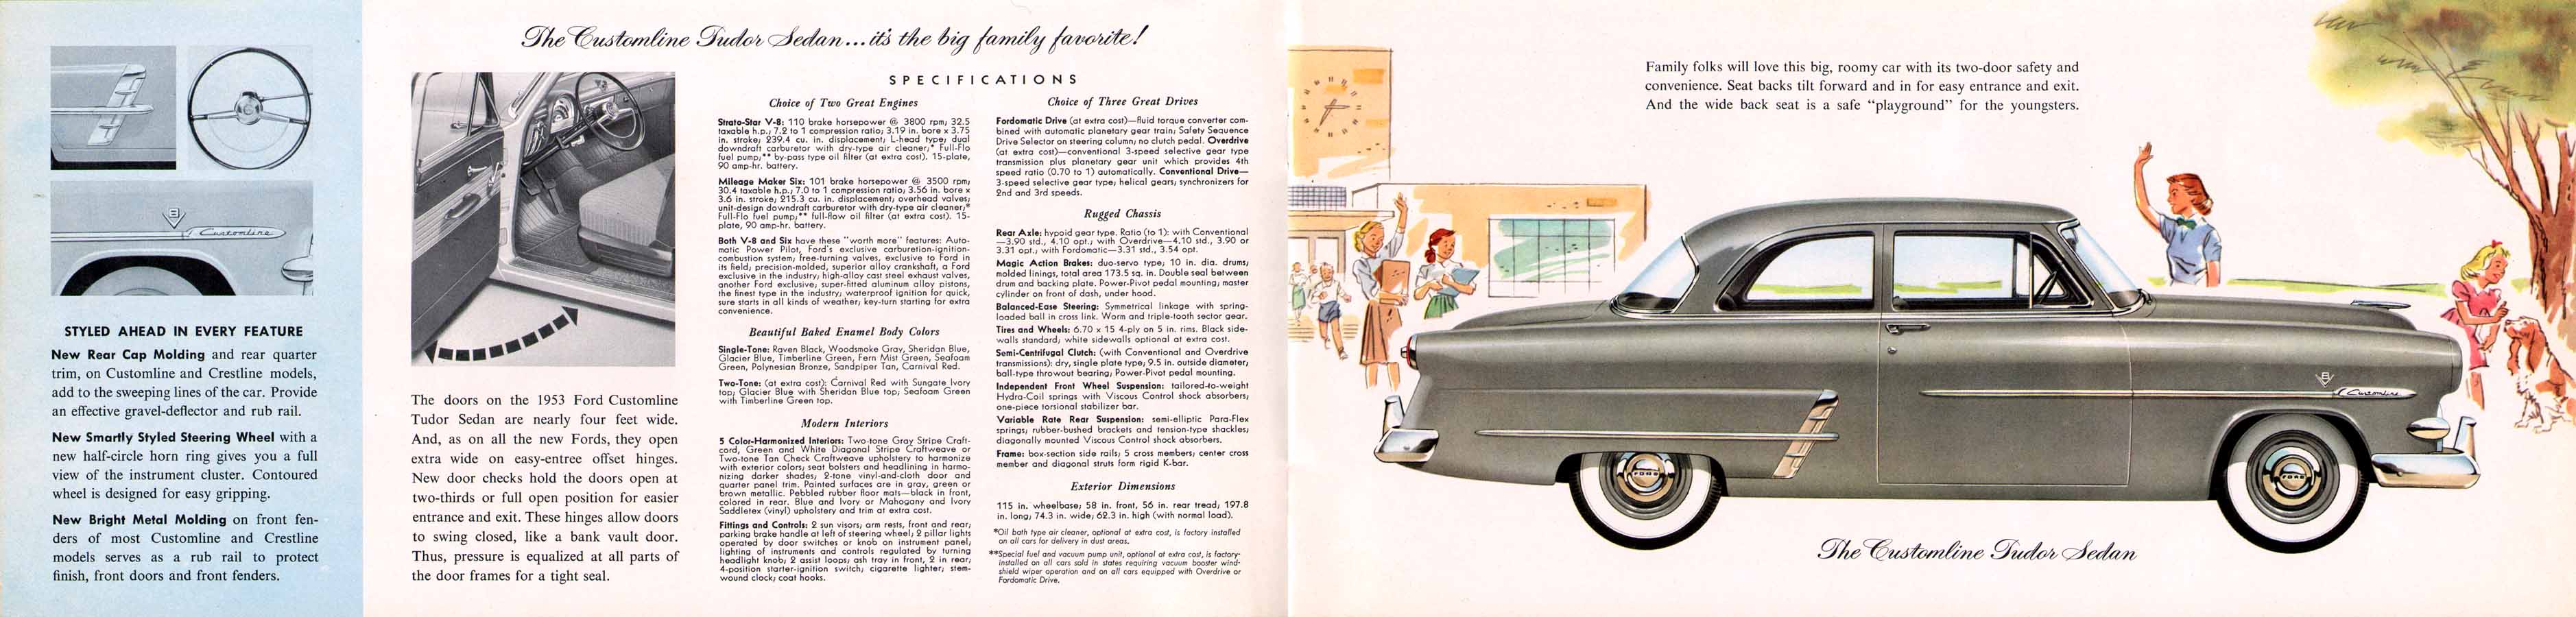 1953 Ford Brochure Page 4